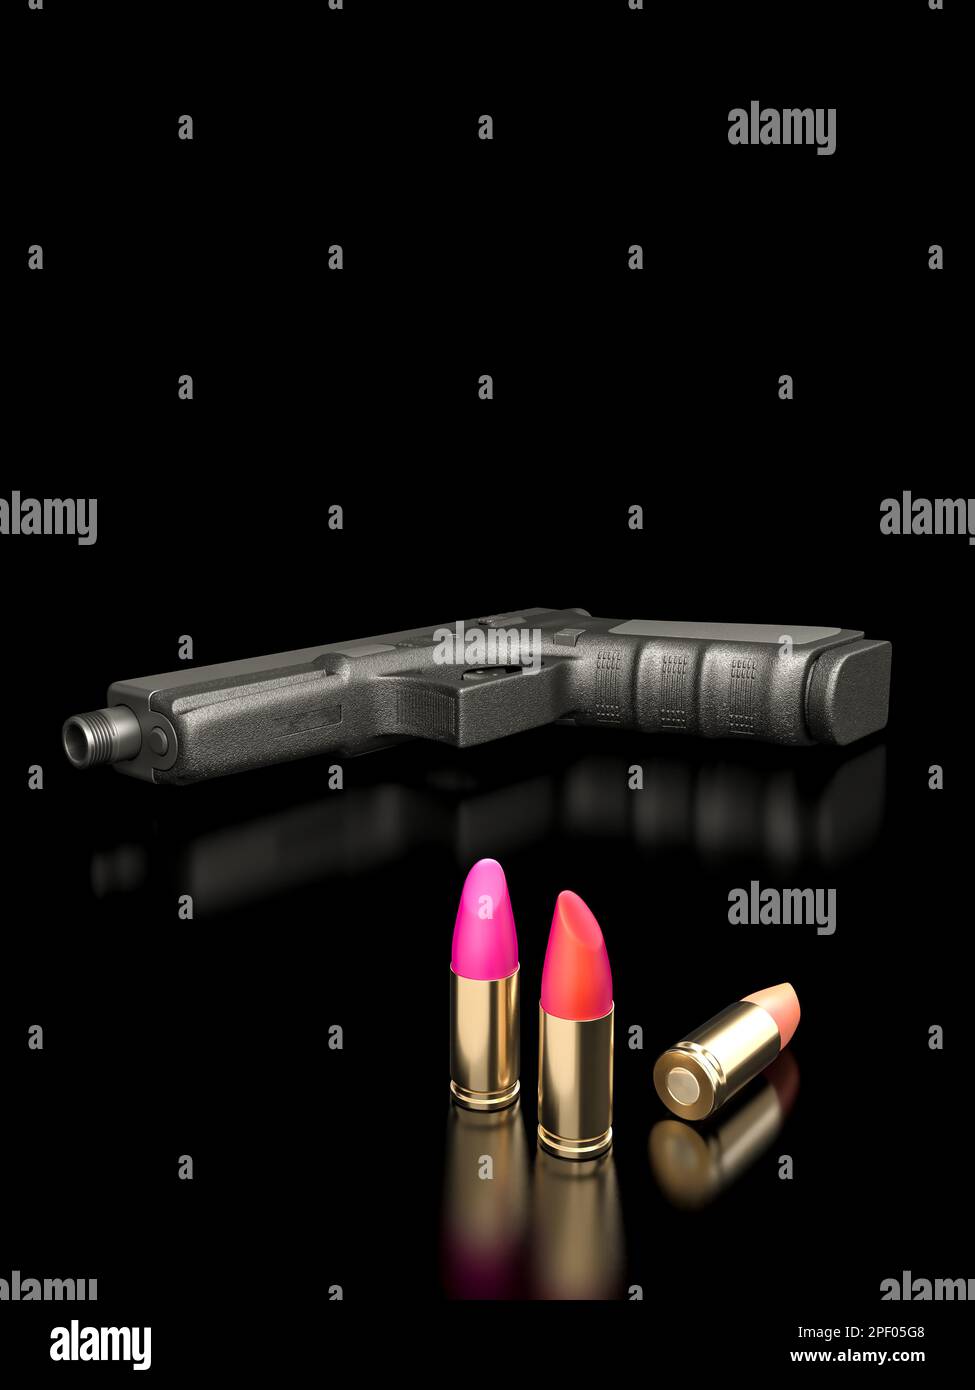 3d render gun and bullets made with lipstick Stock Photo